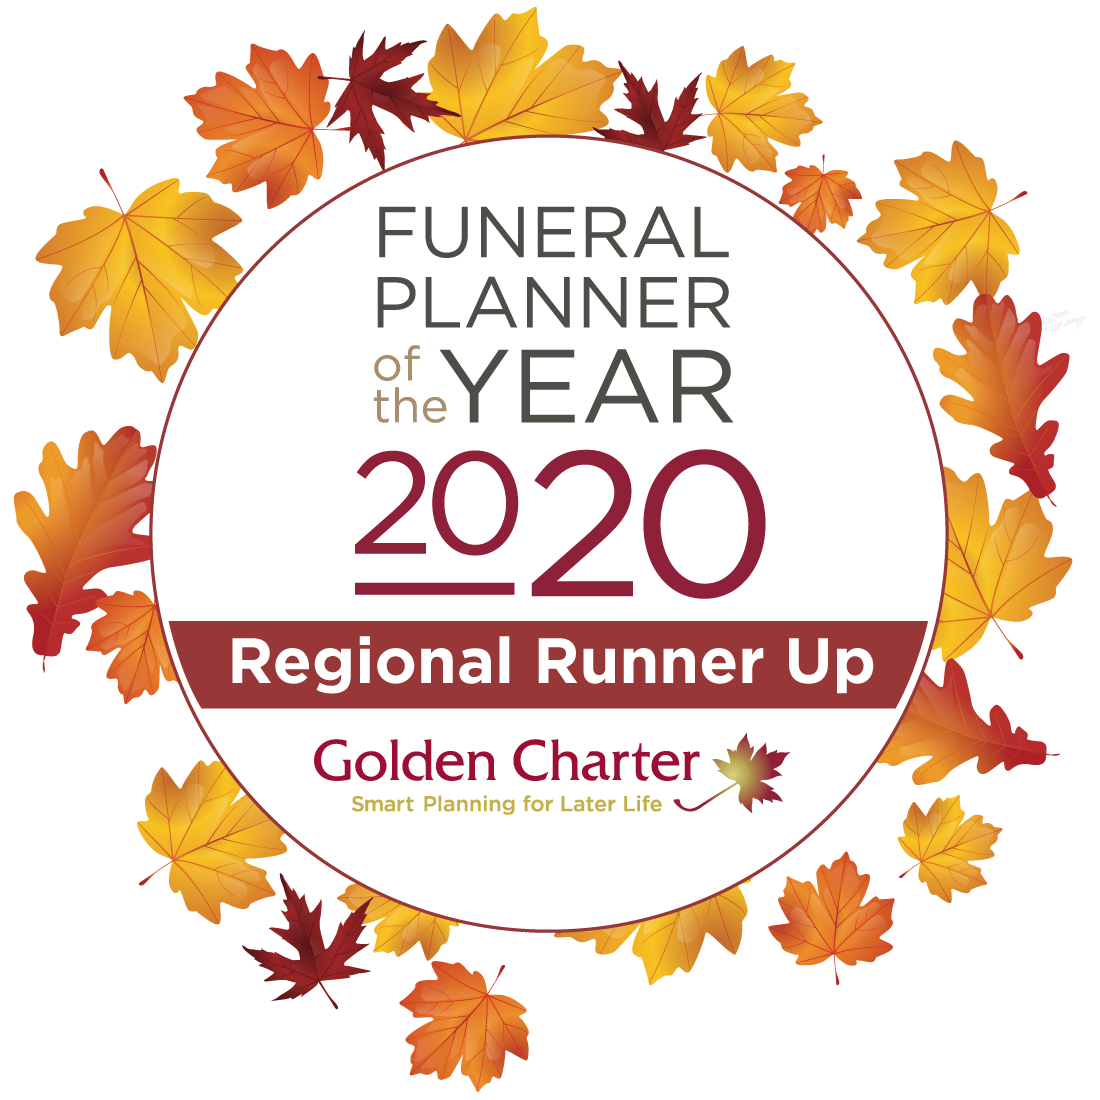 Funeral Planner of the Year 2020